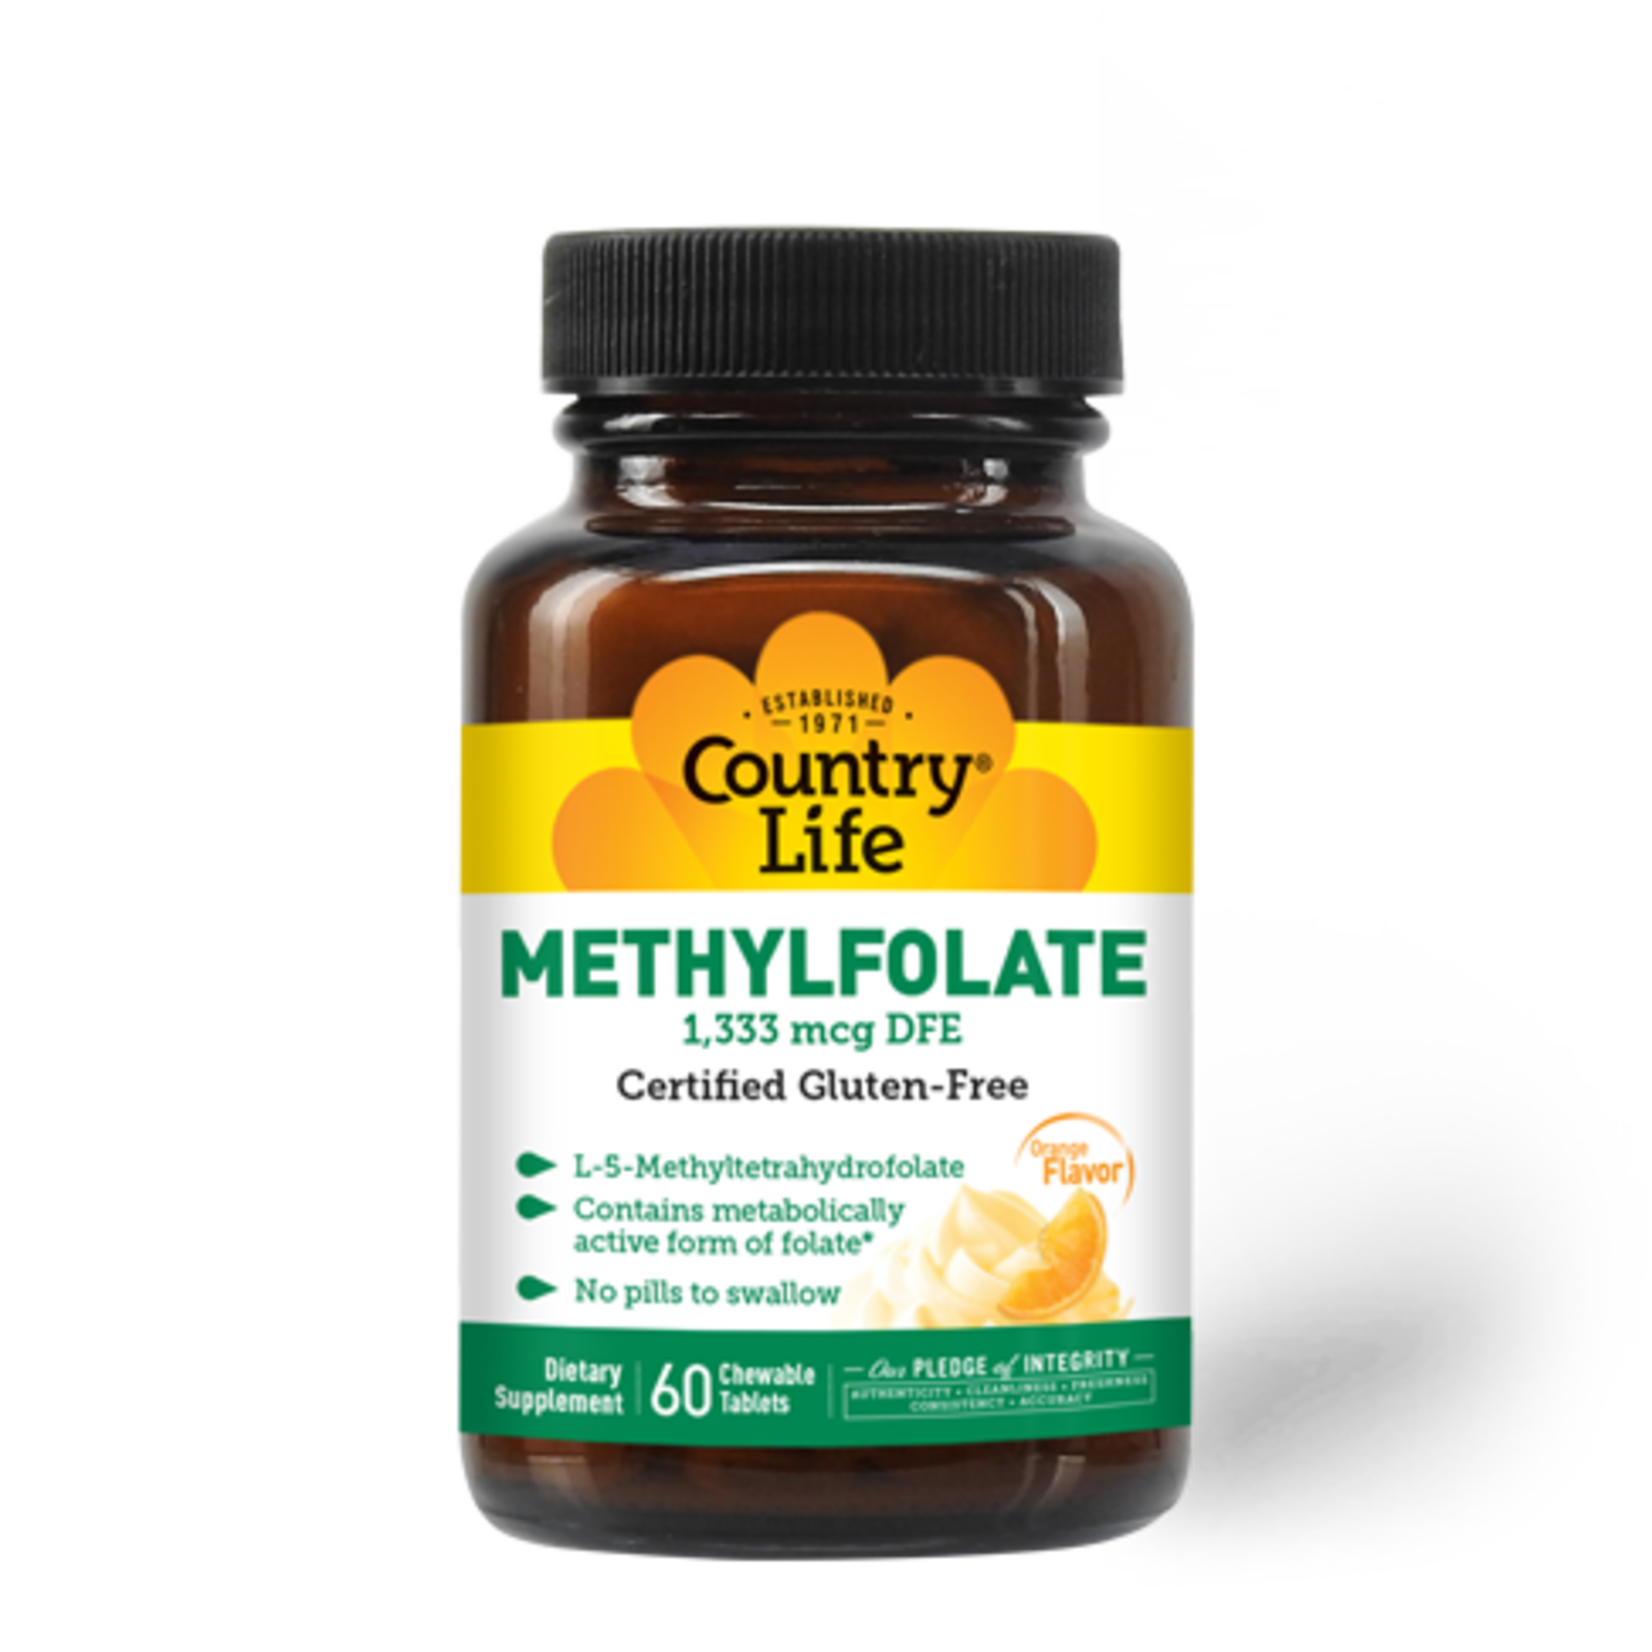 Country Life Country Life - Methylfolate 800 mcg Orange - 60 Tablets